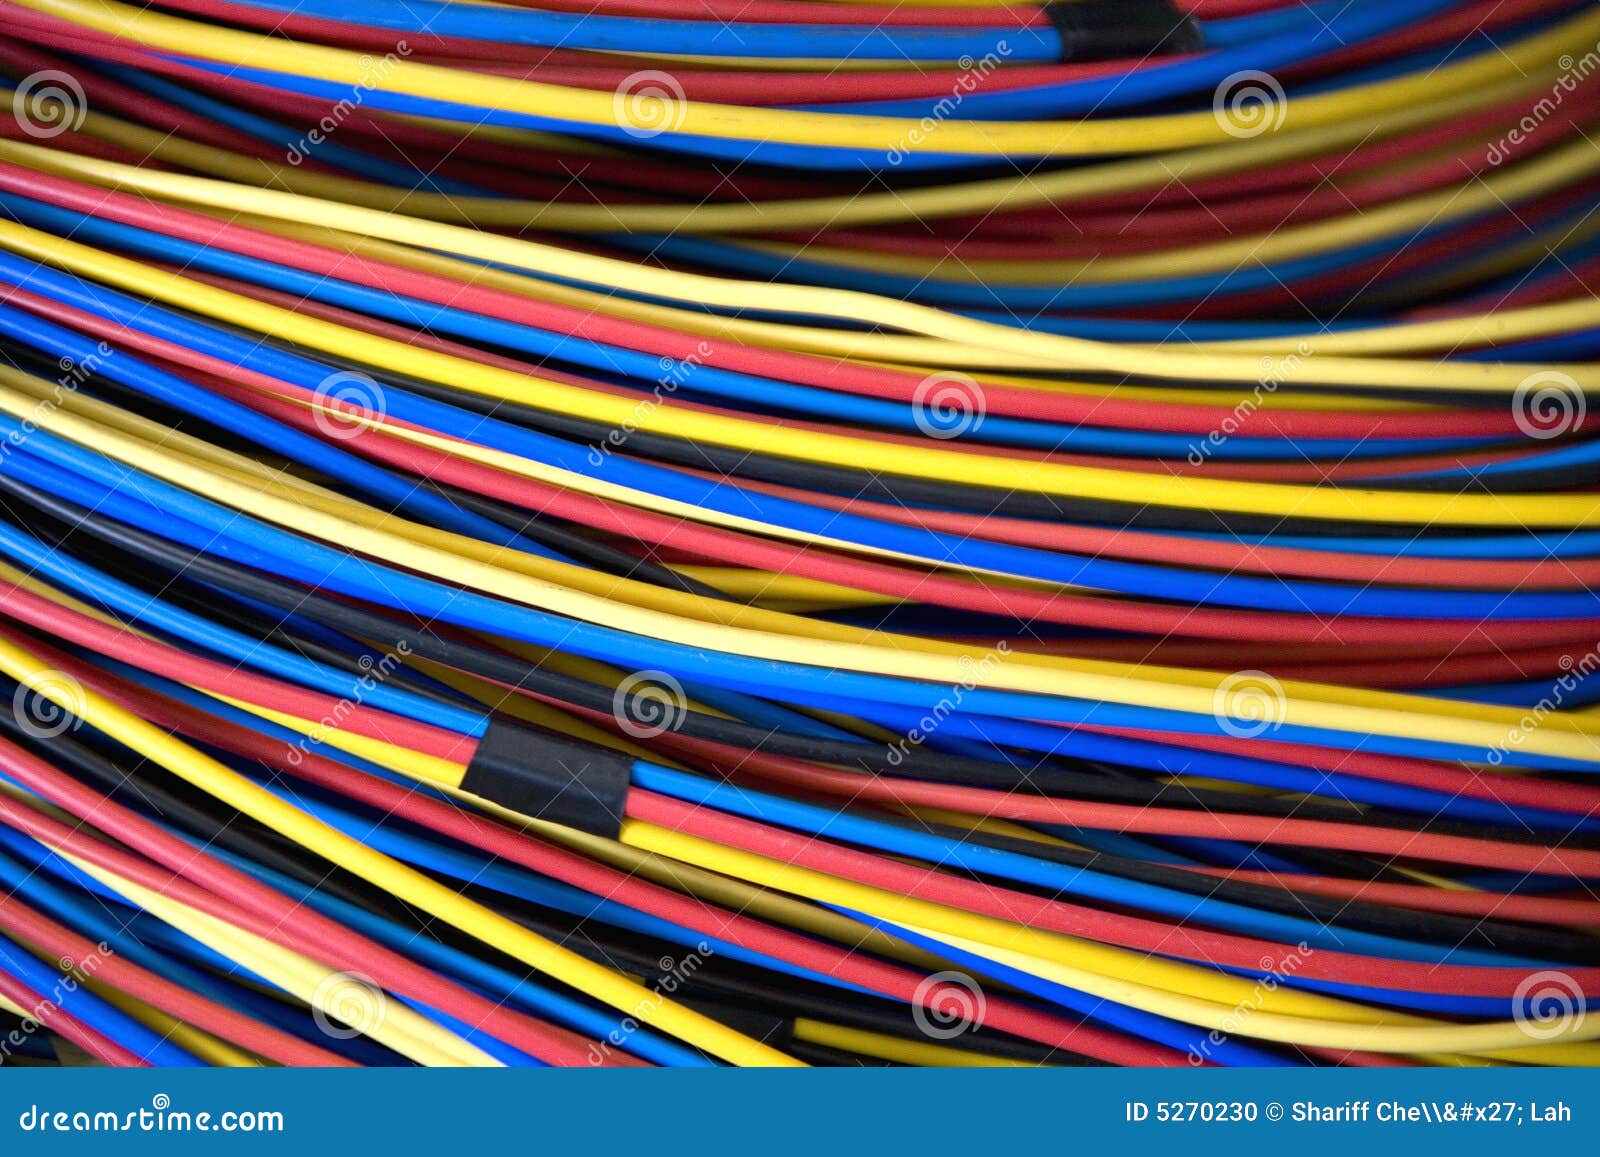 electrical wires